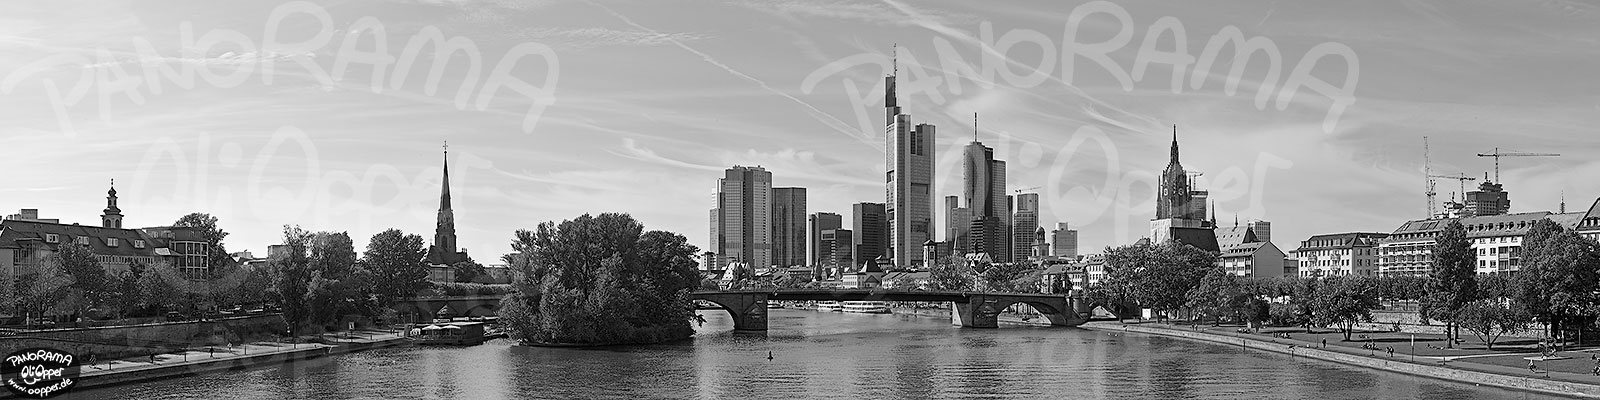 Panorama Frankfurt - Skyline am Tag - p8298 - (c) by Oliver Opper